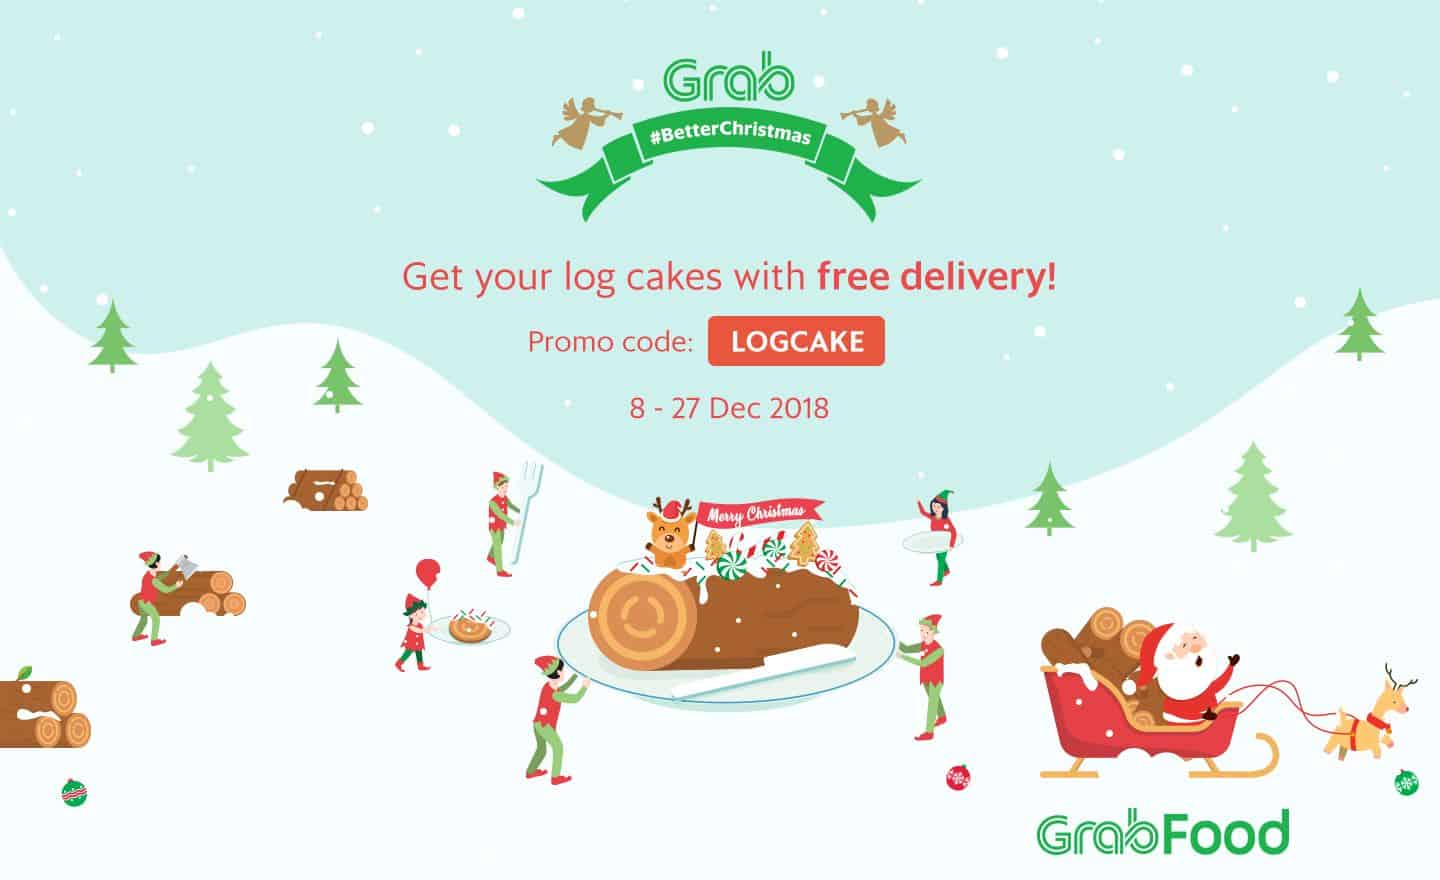 Get your log cakes with free delivery! Promo code: LOGCAKE 8-27 Dec 2018